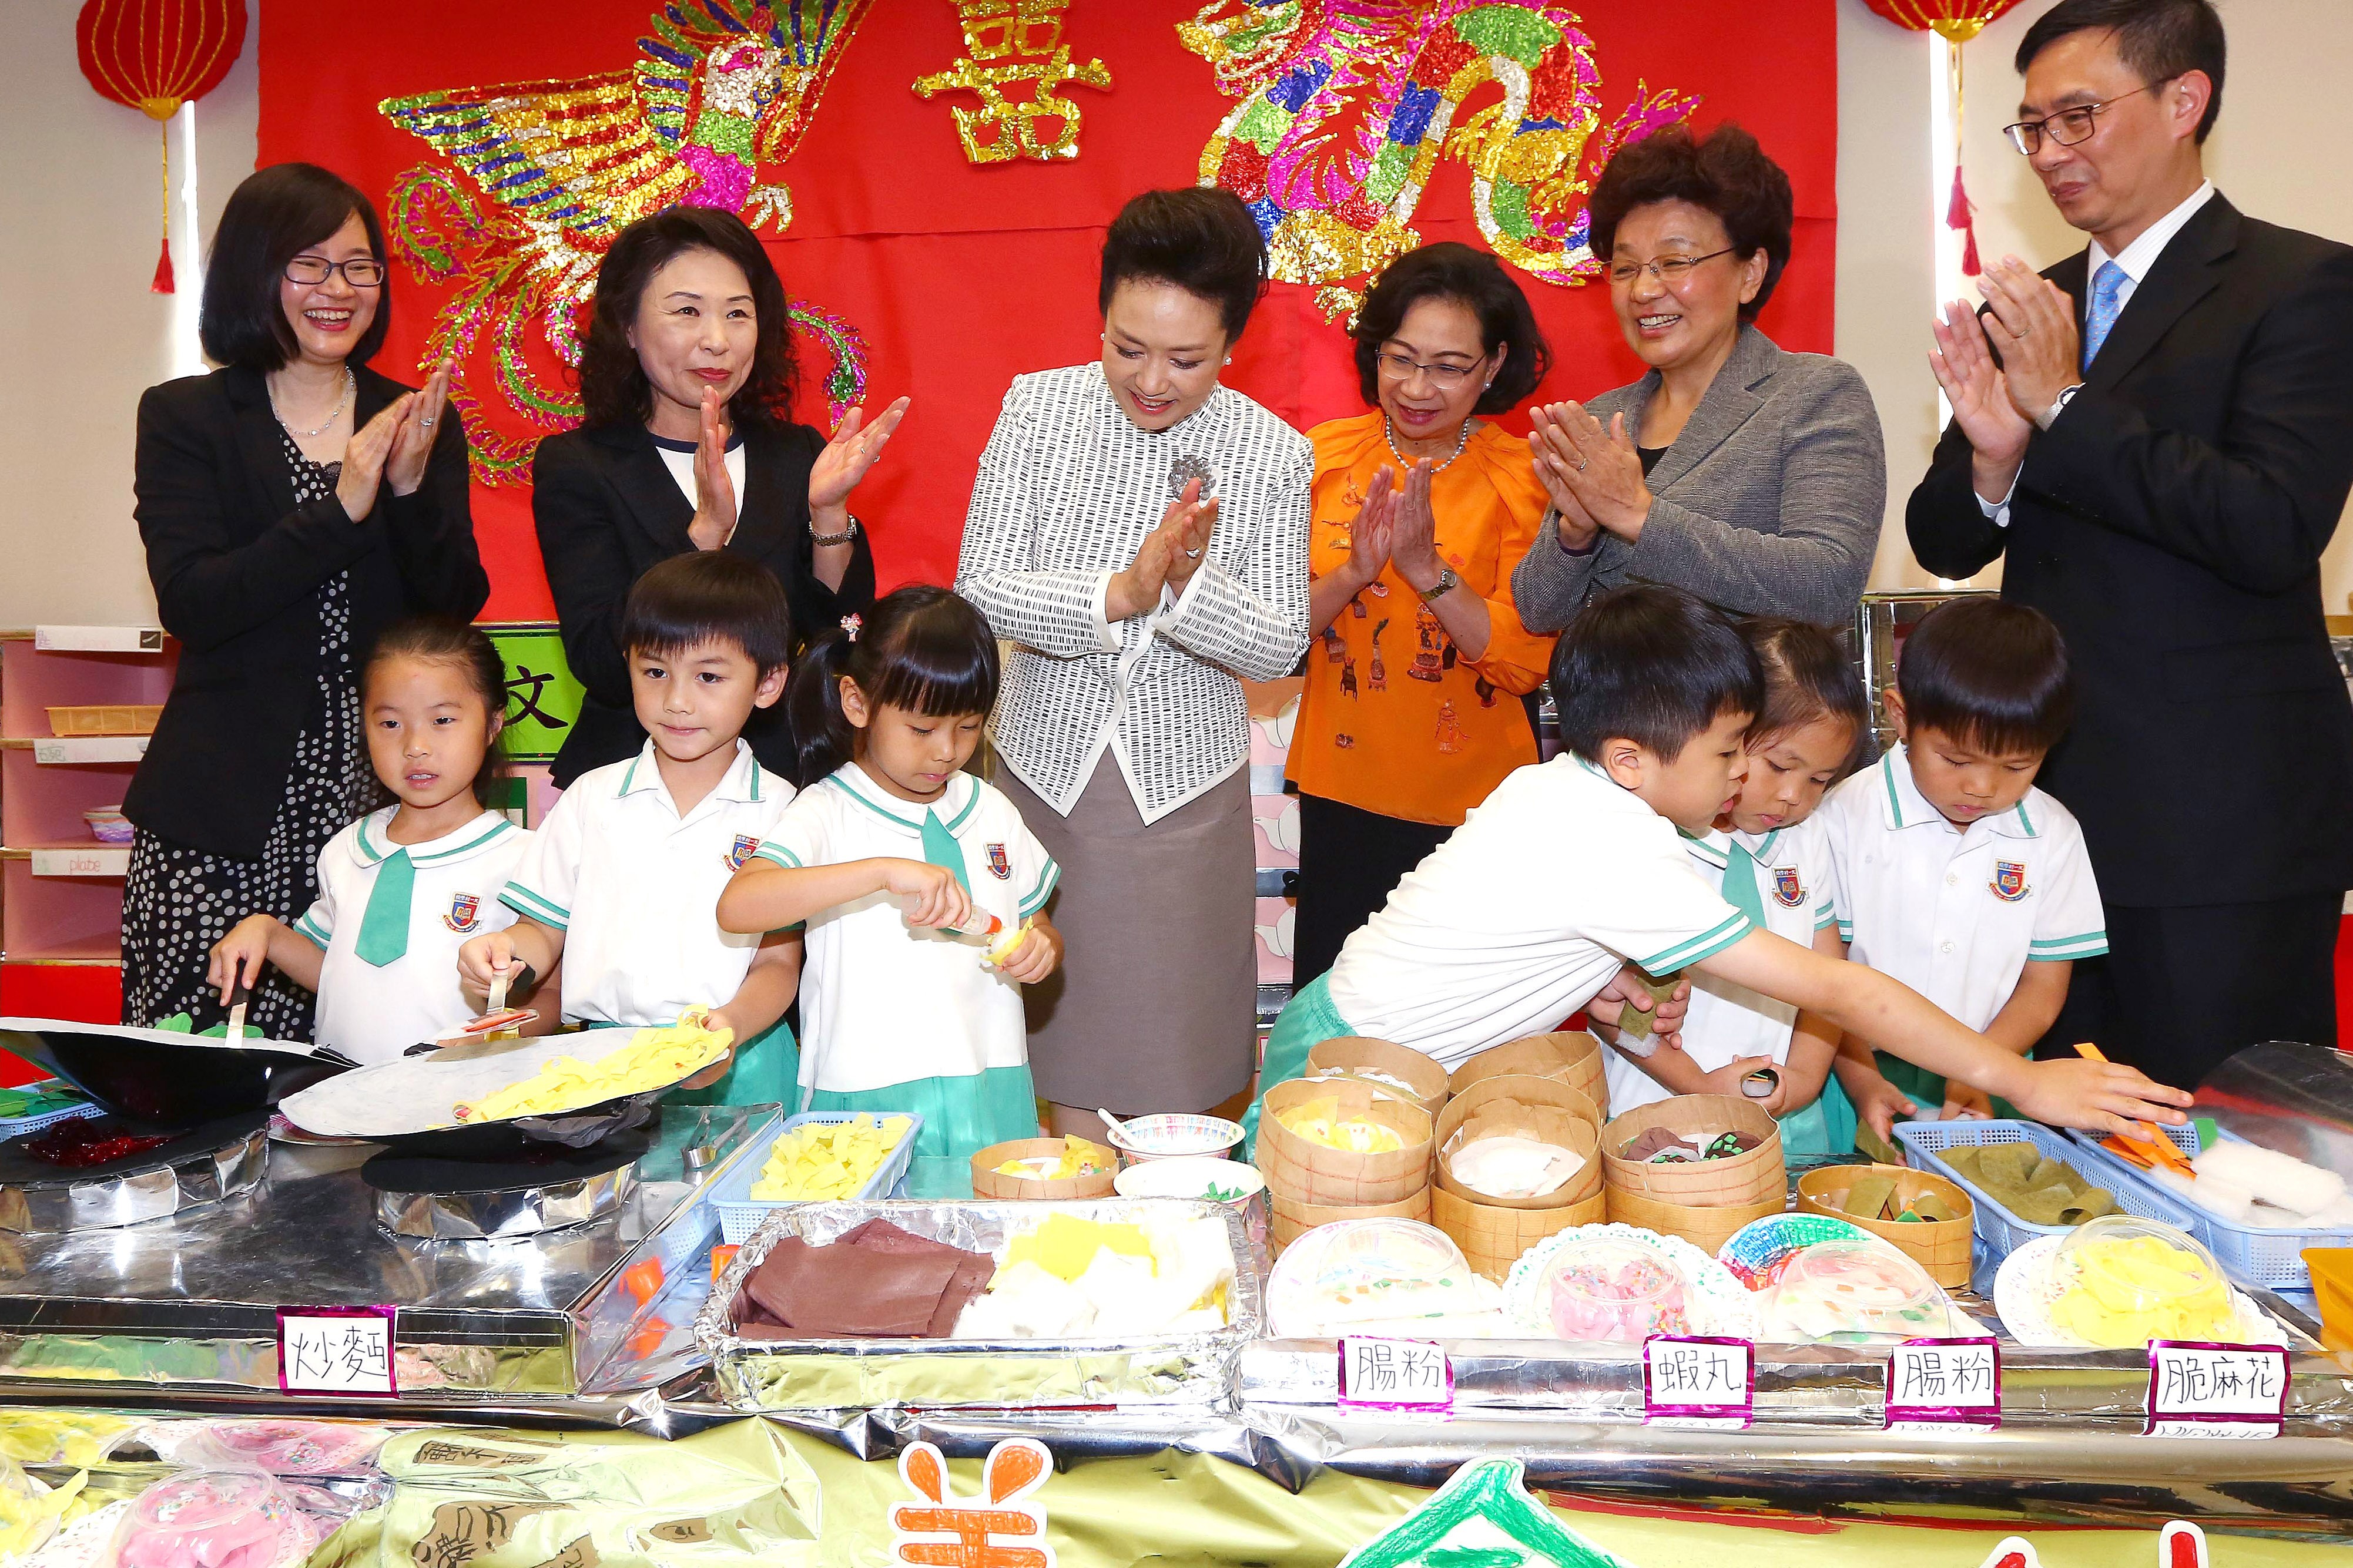 There are no afternoon classes for the preschool on Thursday, but a session was called to welcome China’s first lady